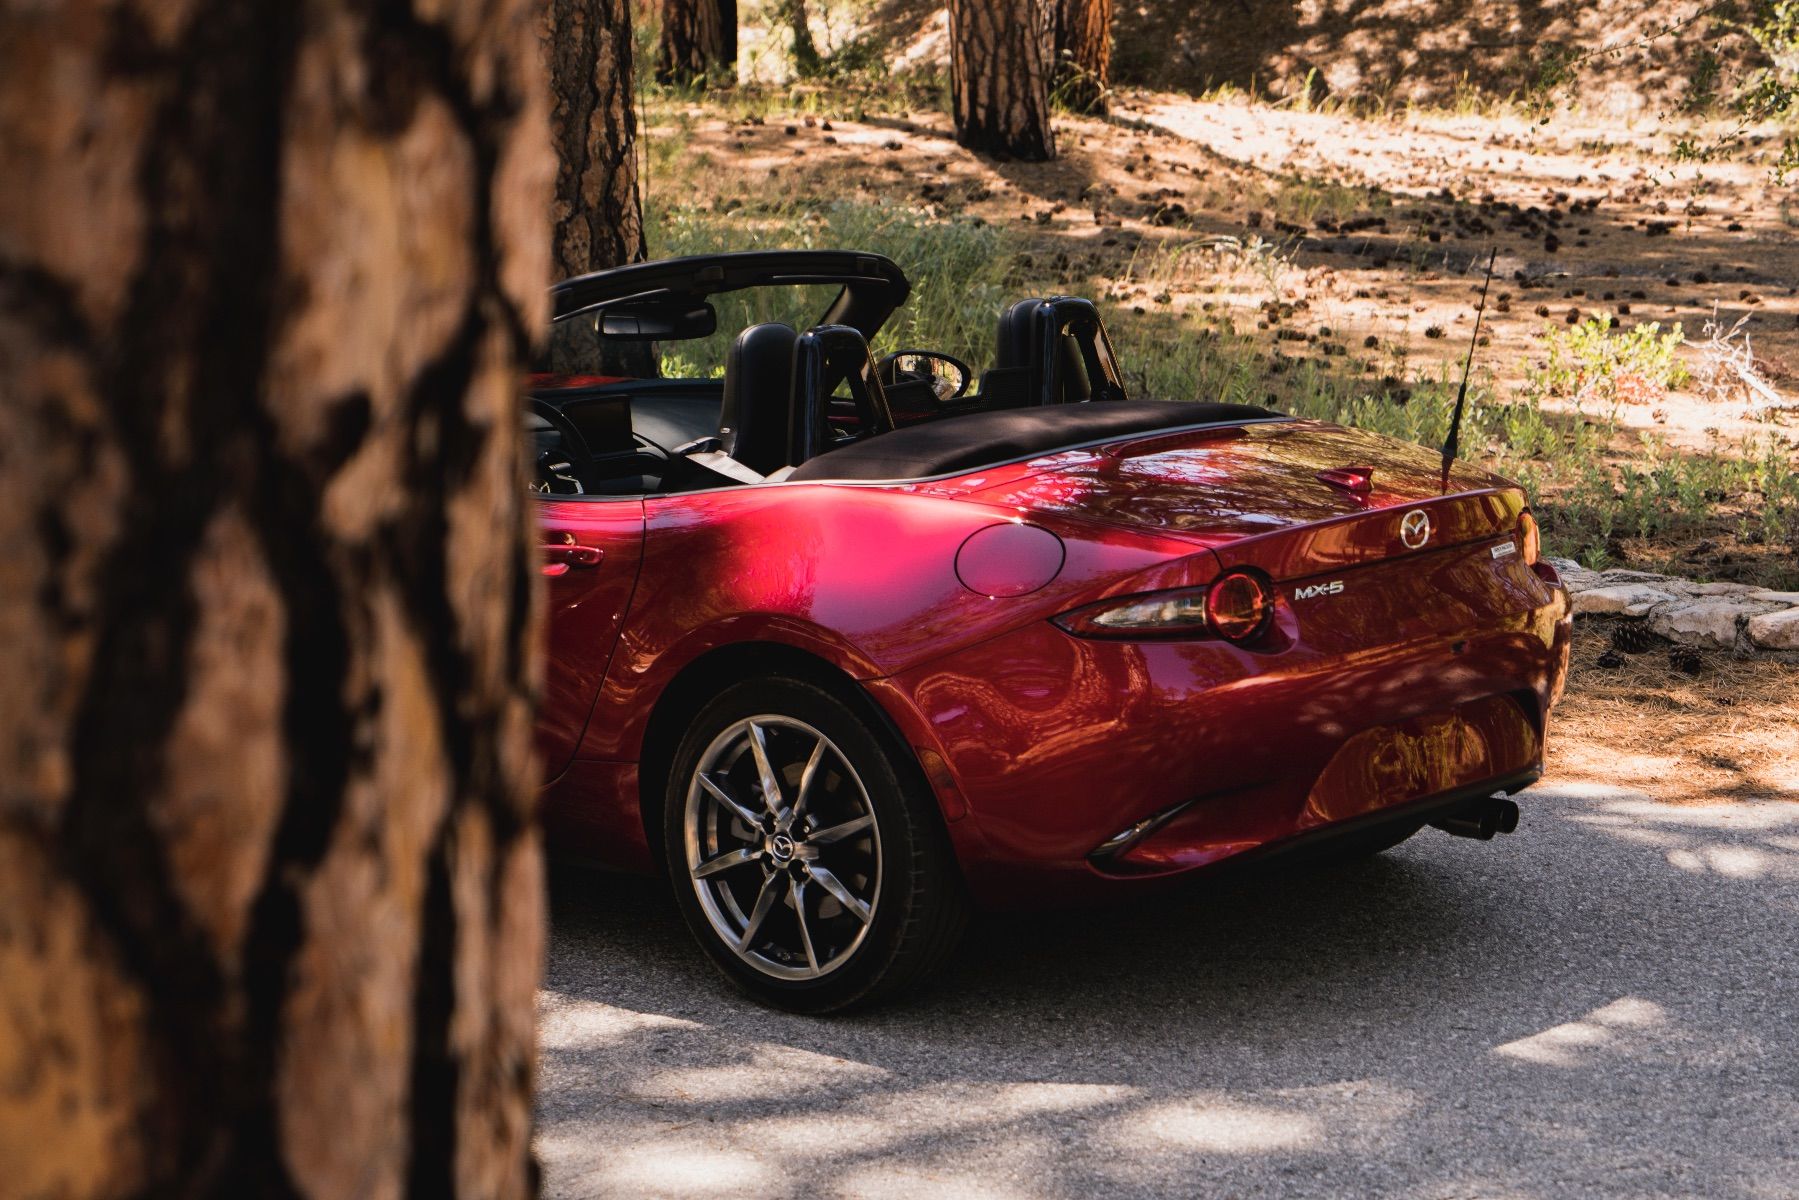 Centennial Mazda  Consumer Reports Says The 2020 Mazda MX-5 Miata Is The  Most Reliable Vehicle You Can Buy